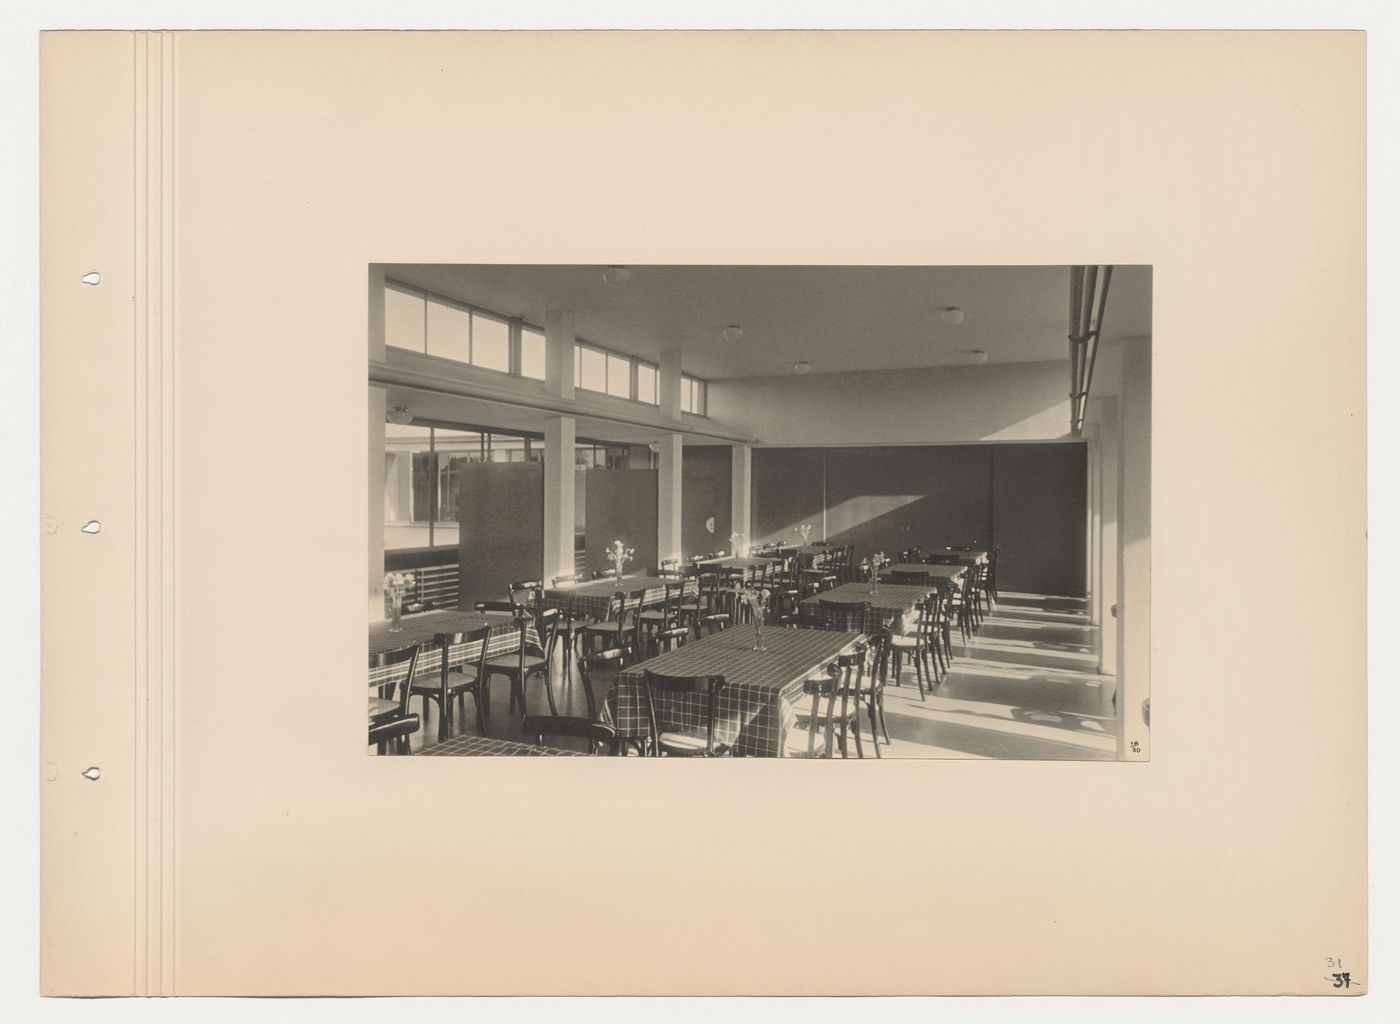 Interior view of the furnished dining hall showing the closed partition wall, Budge Foundation Old People's Home, Frankfurt am Main, Germany